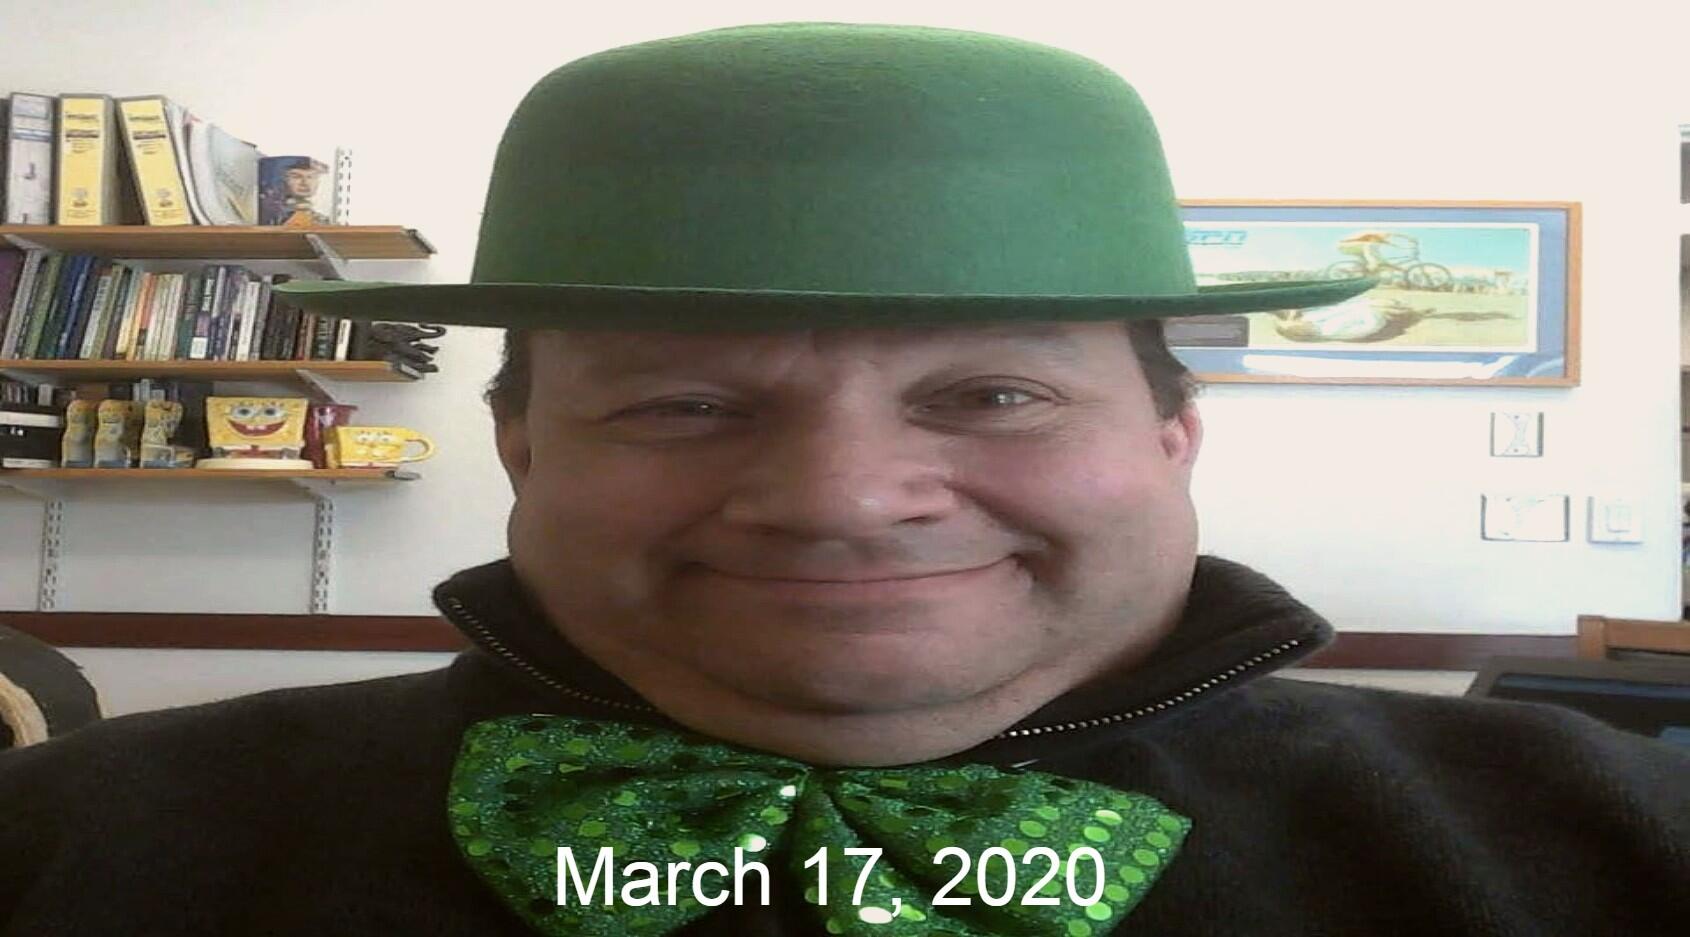 Mr. Jackson with very funny selfie for St. Patrick's day. 